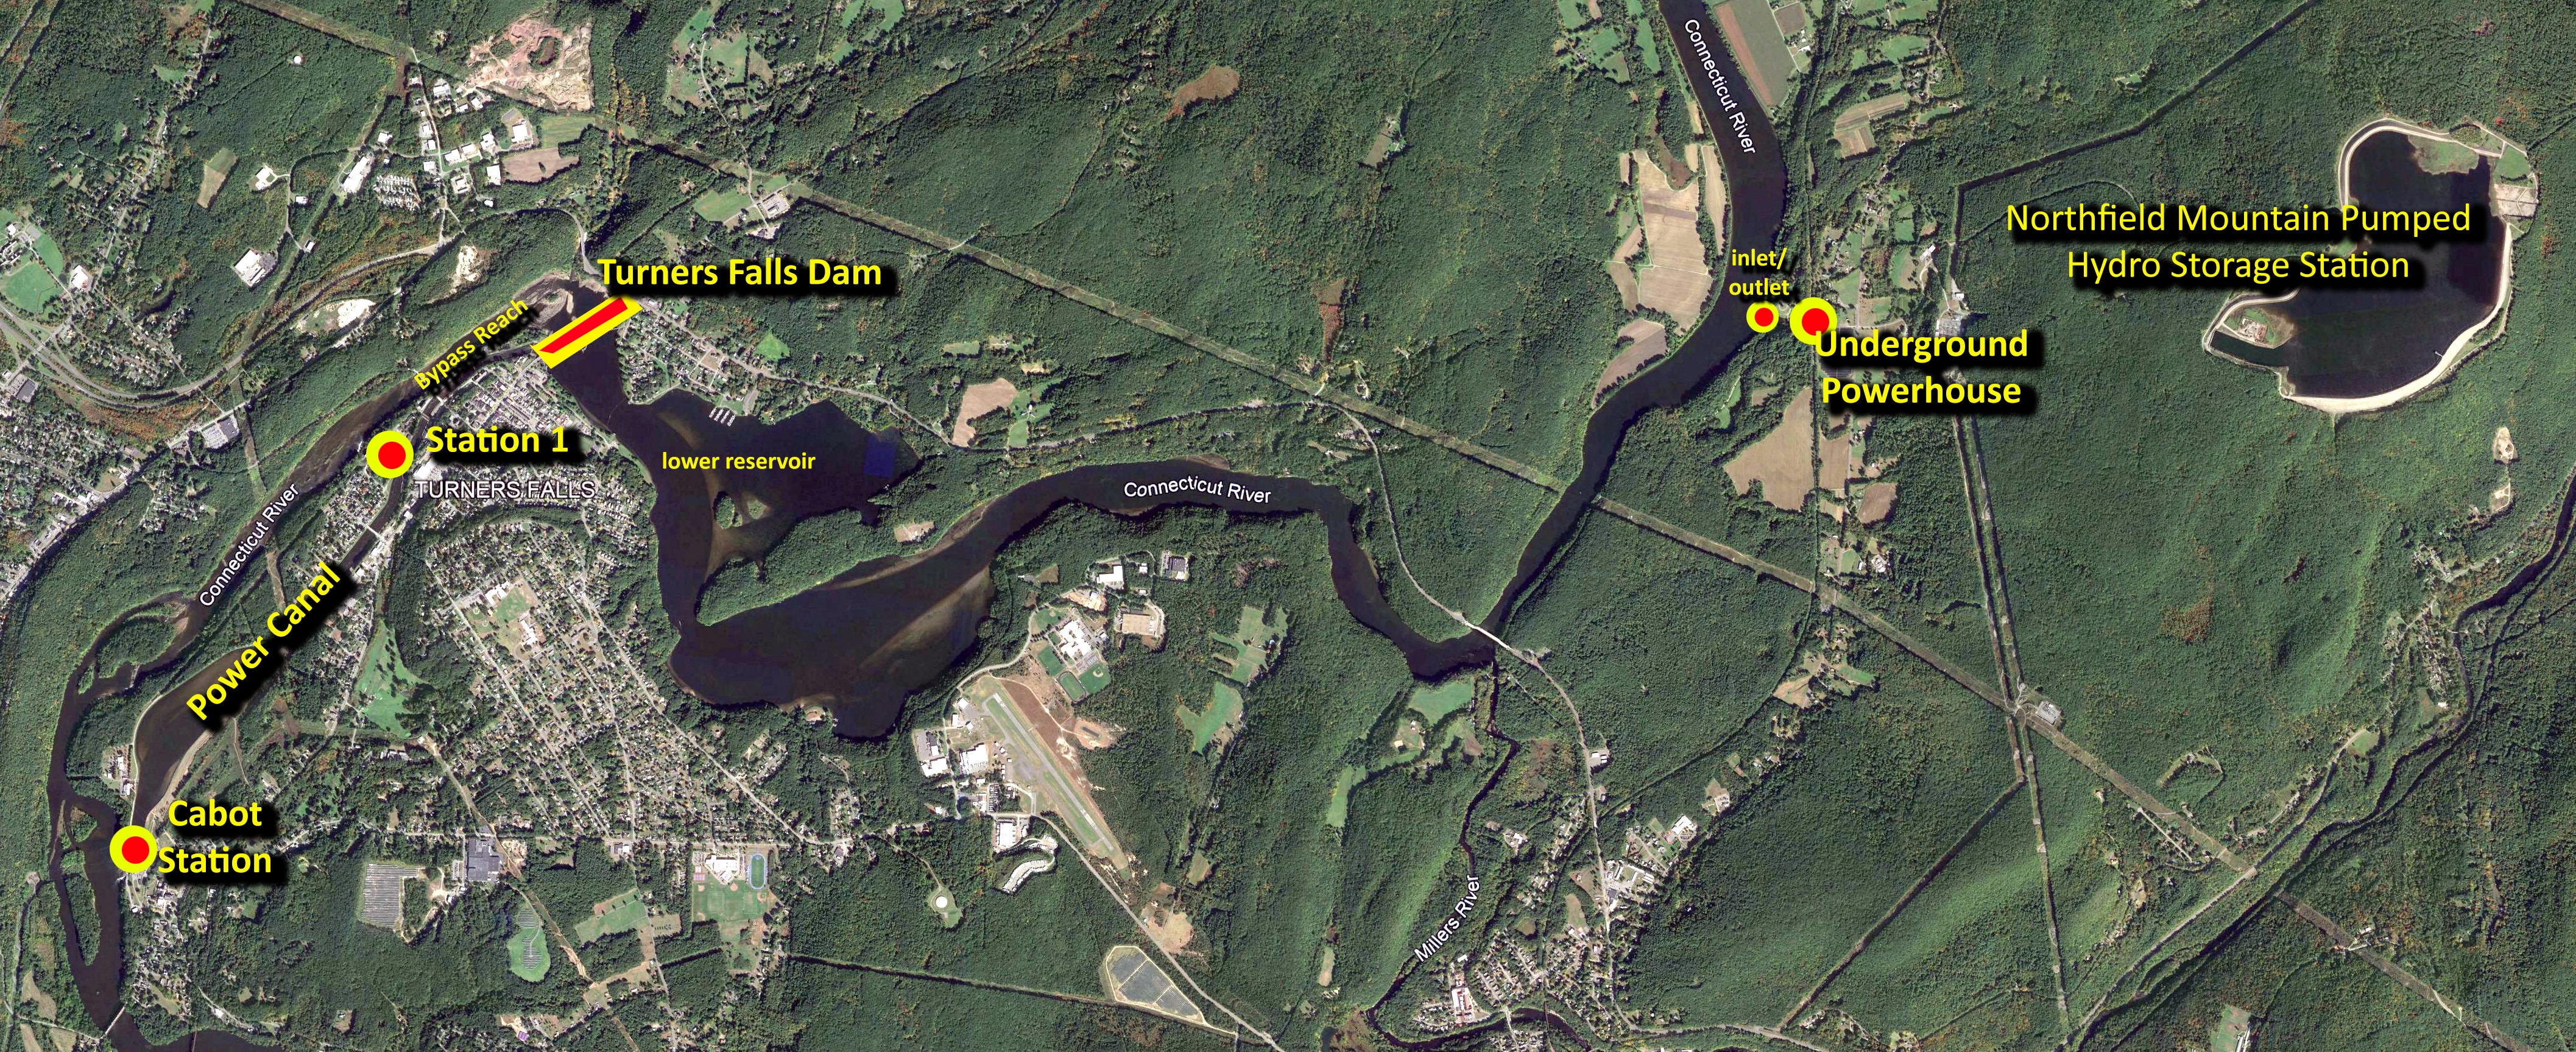 Aerial view of the Turners Falls area with key features of the FirstLight relicensing project highlighted